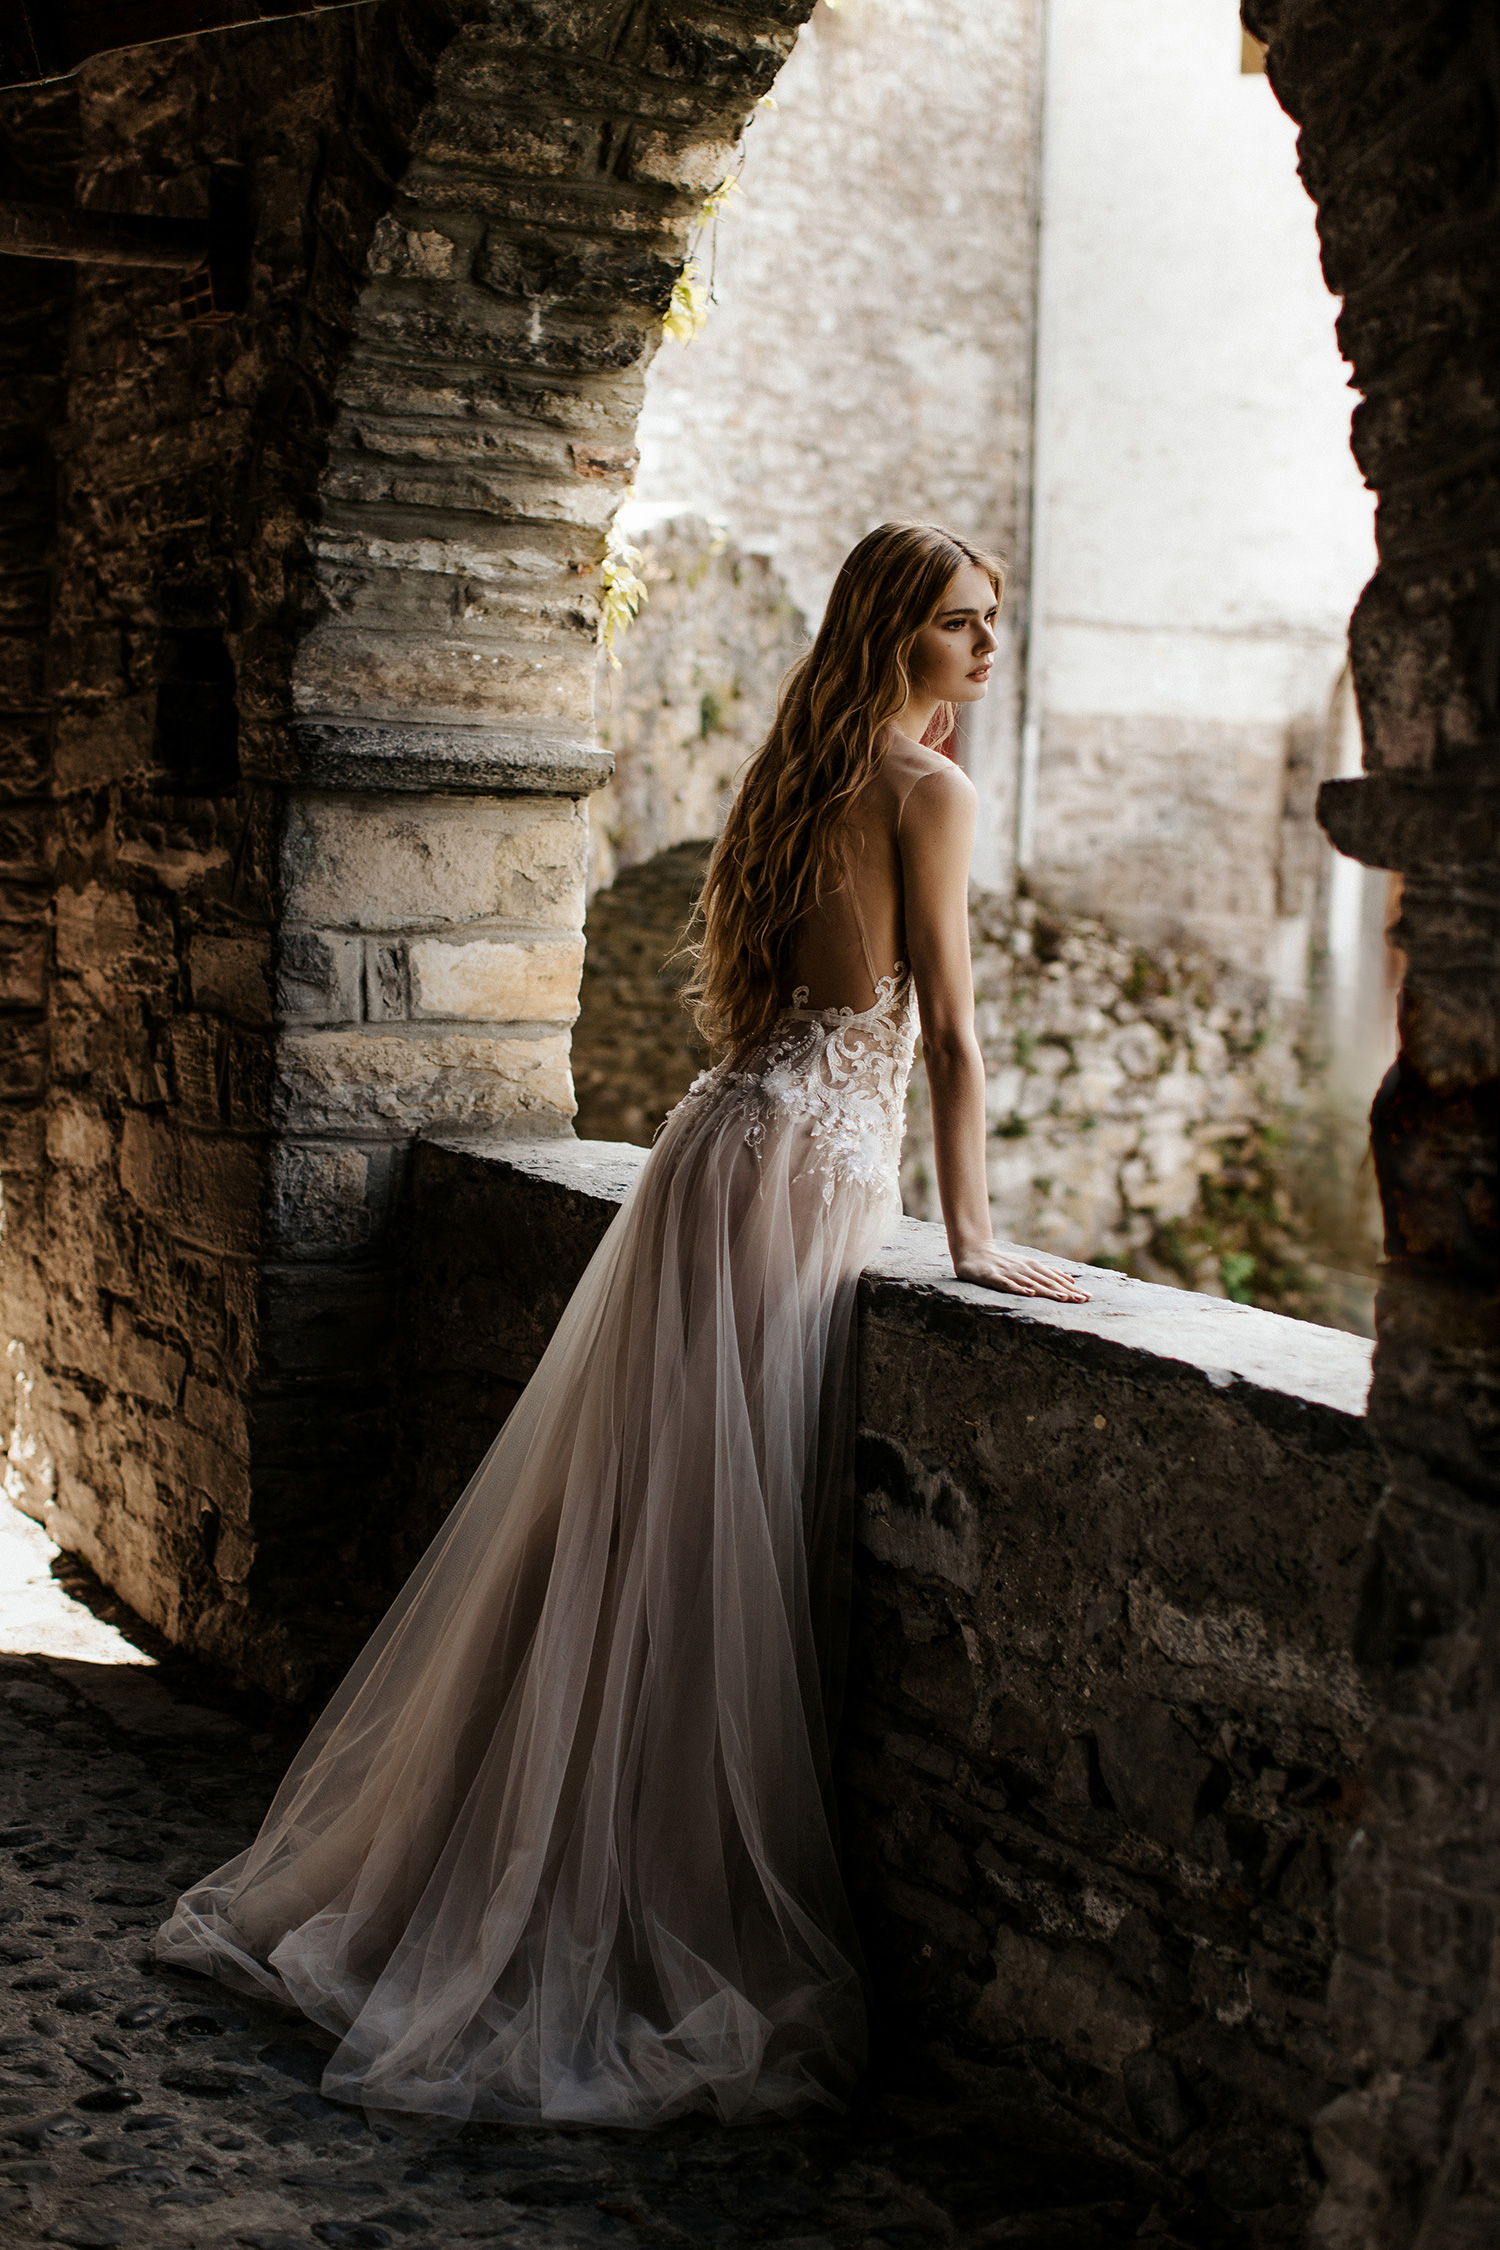 MUSE by Berta Spring 2022 Collection. www.theweddingnotebook.com